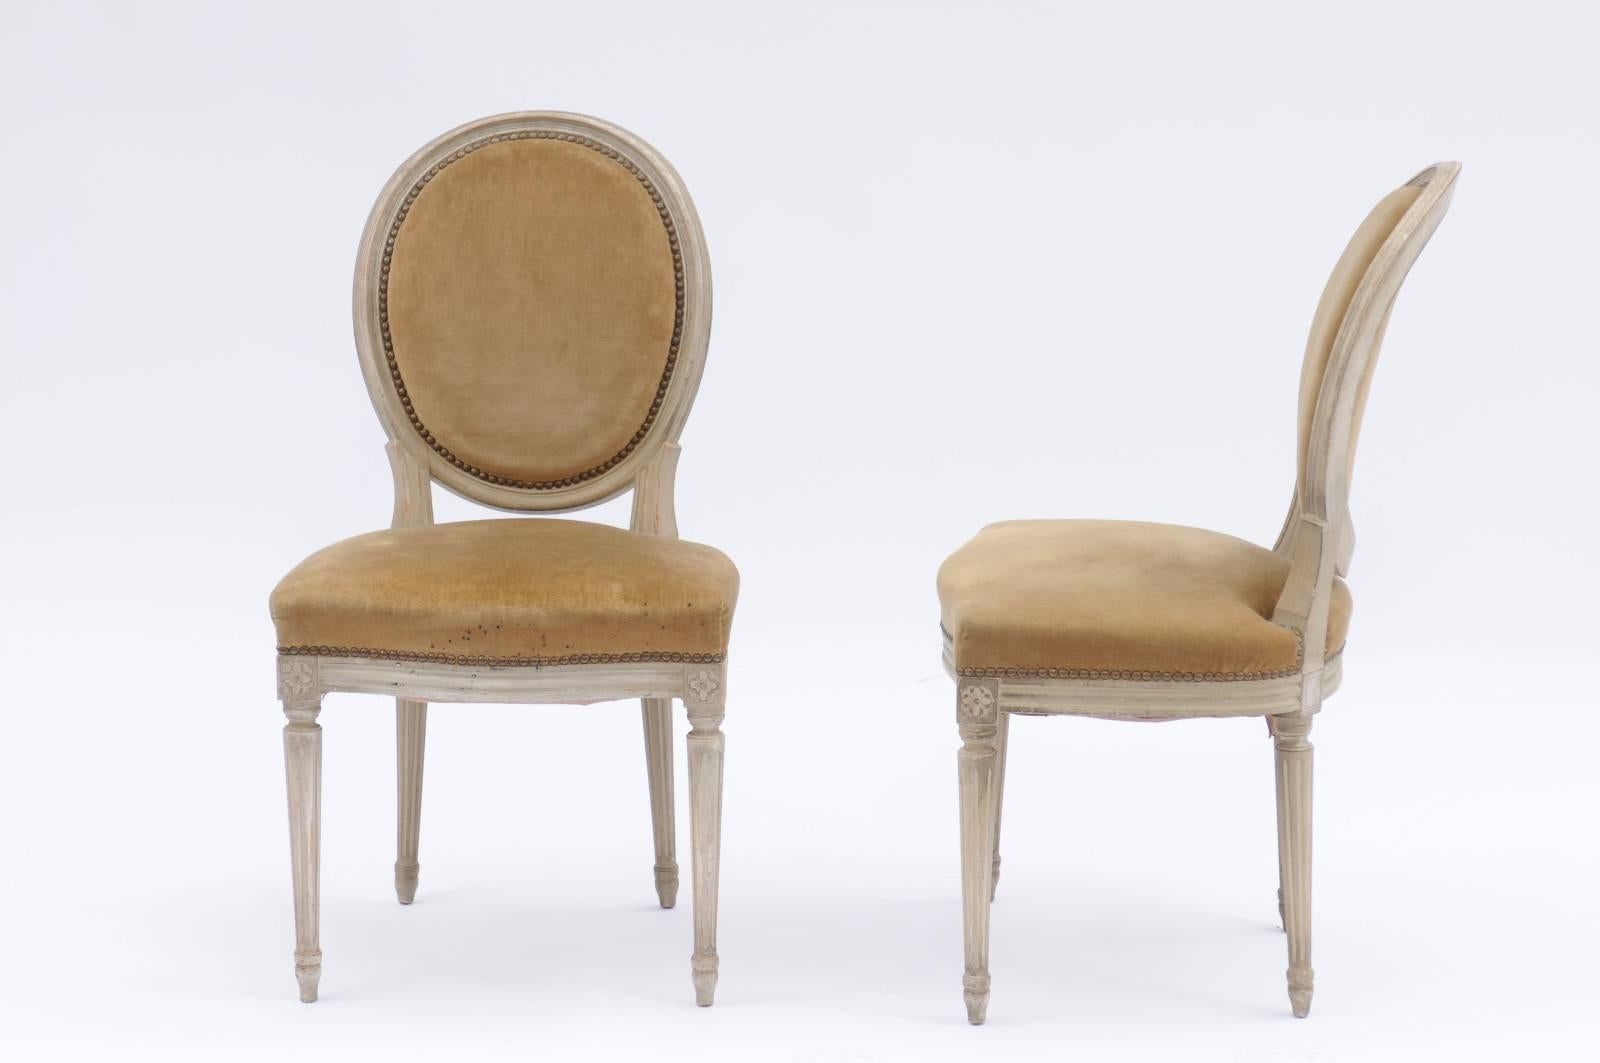 Pair of French Louis XVI Style Painted Wood Side Chairs with Original Upholstery 2